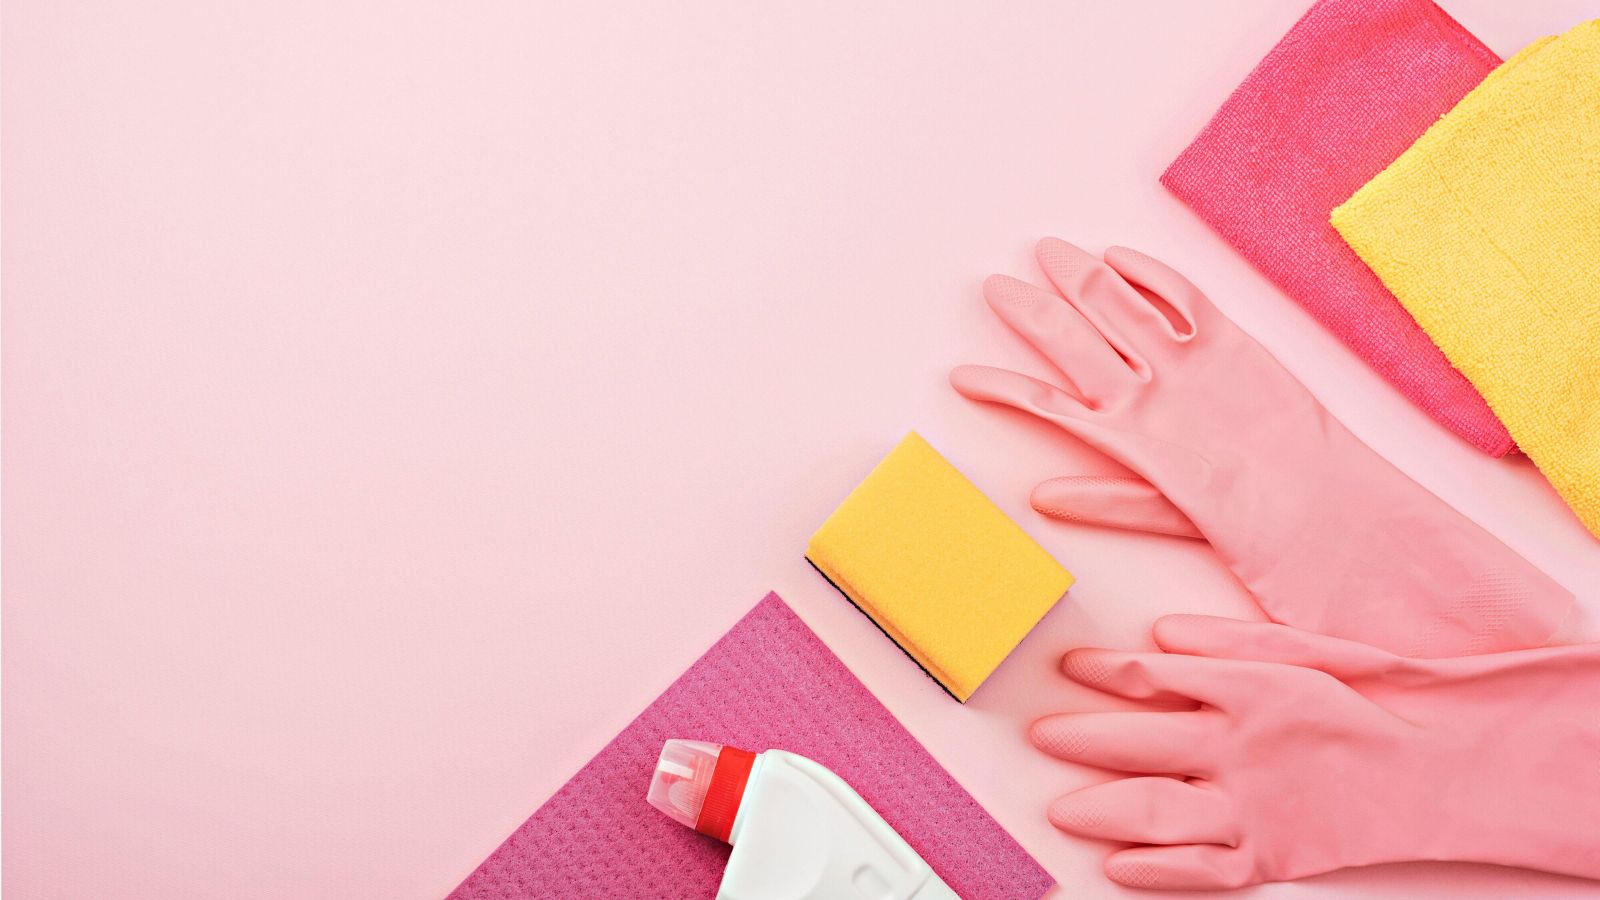 10 things you can clean with The Pink Stuff